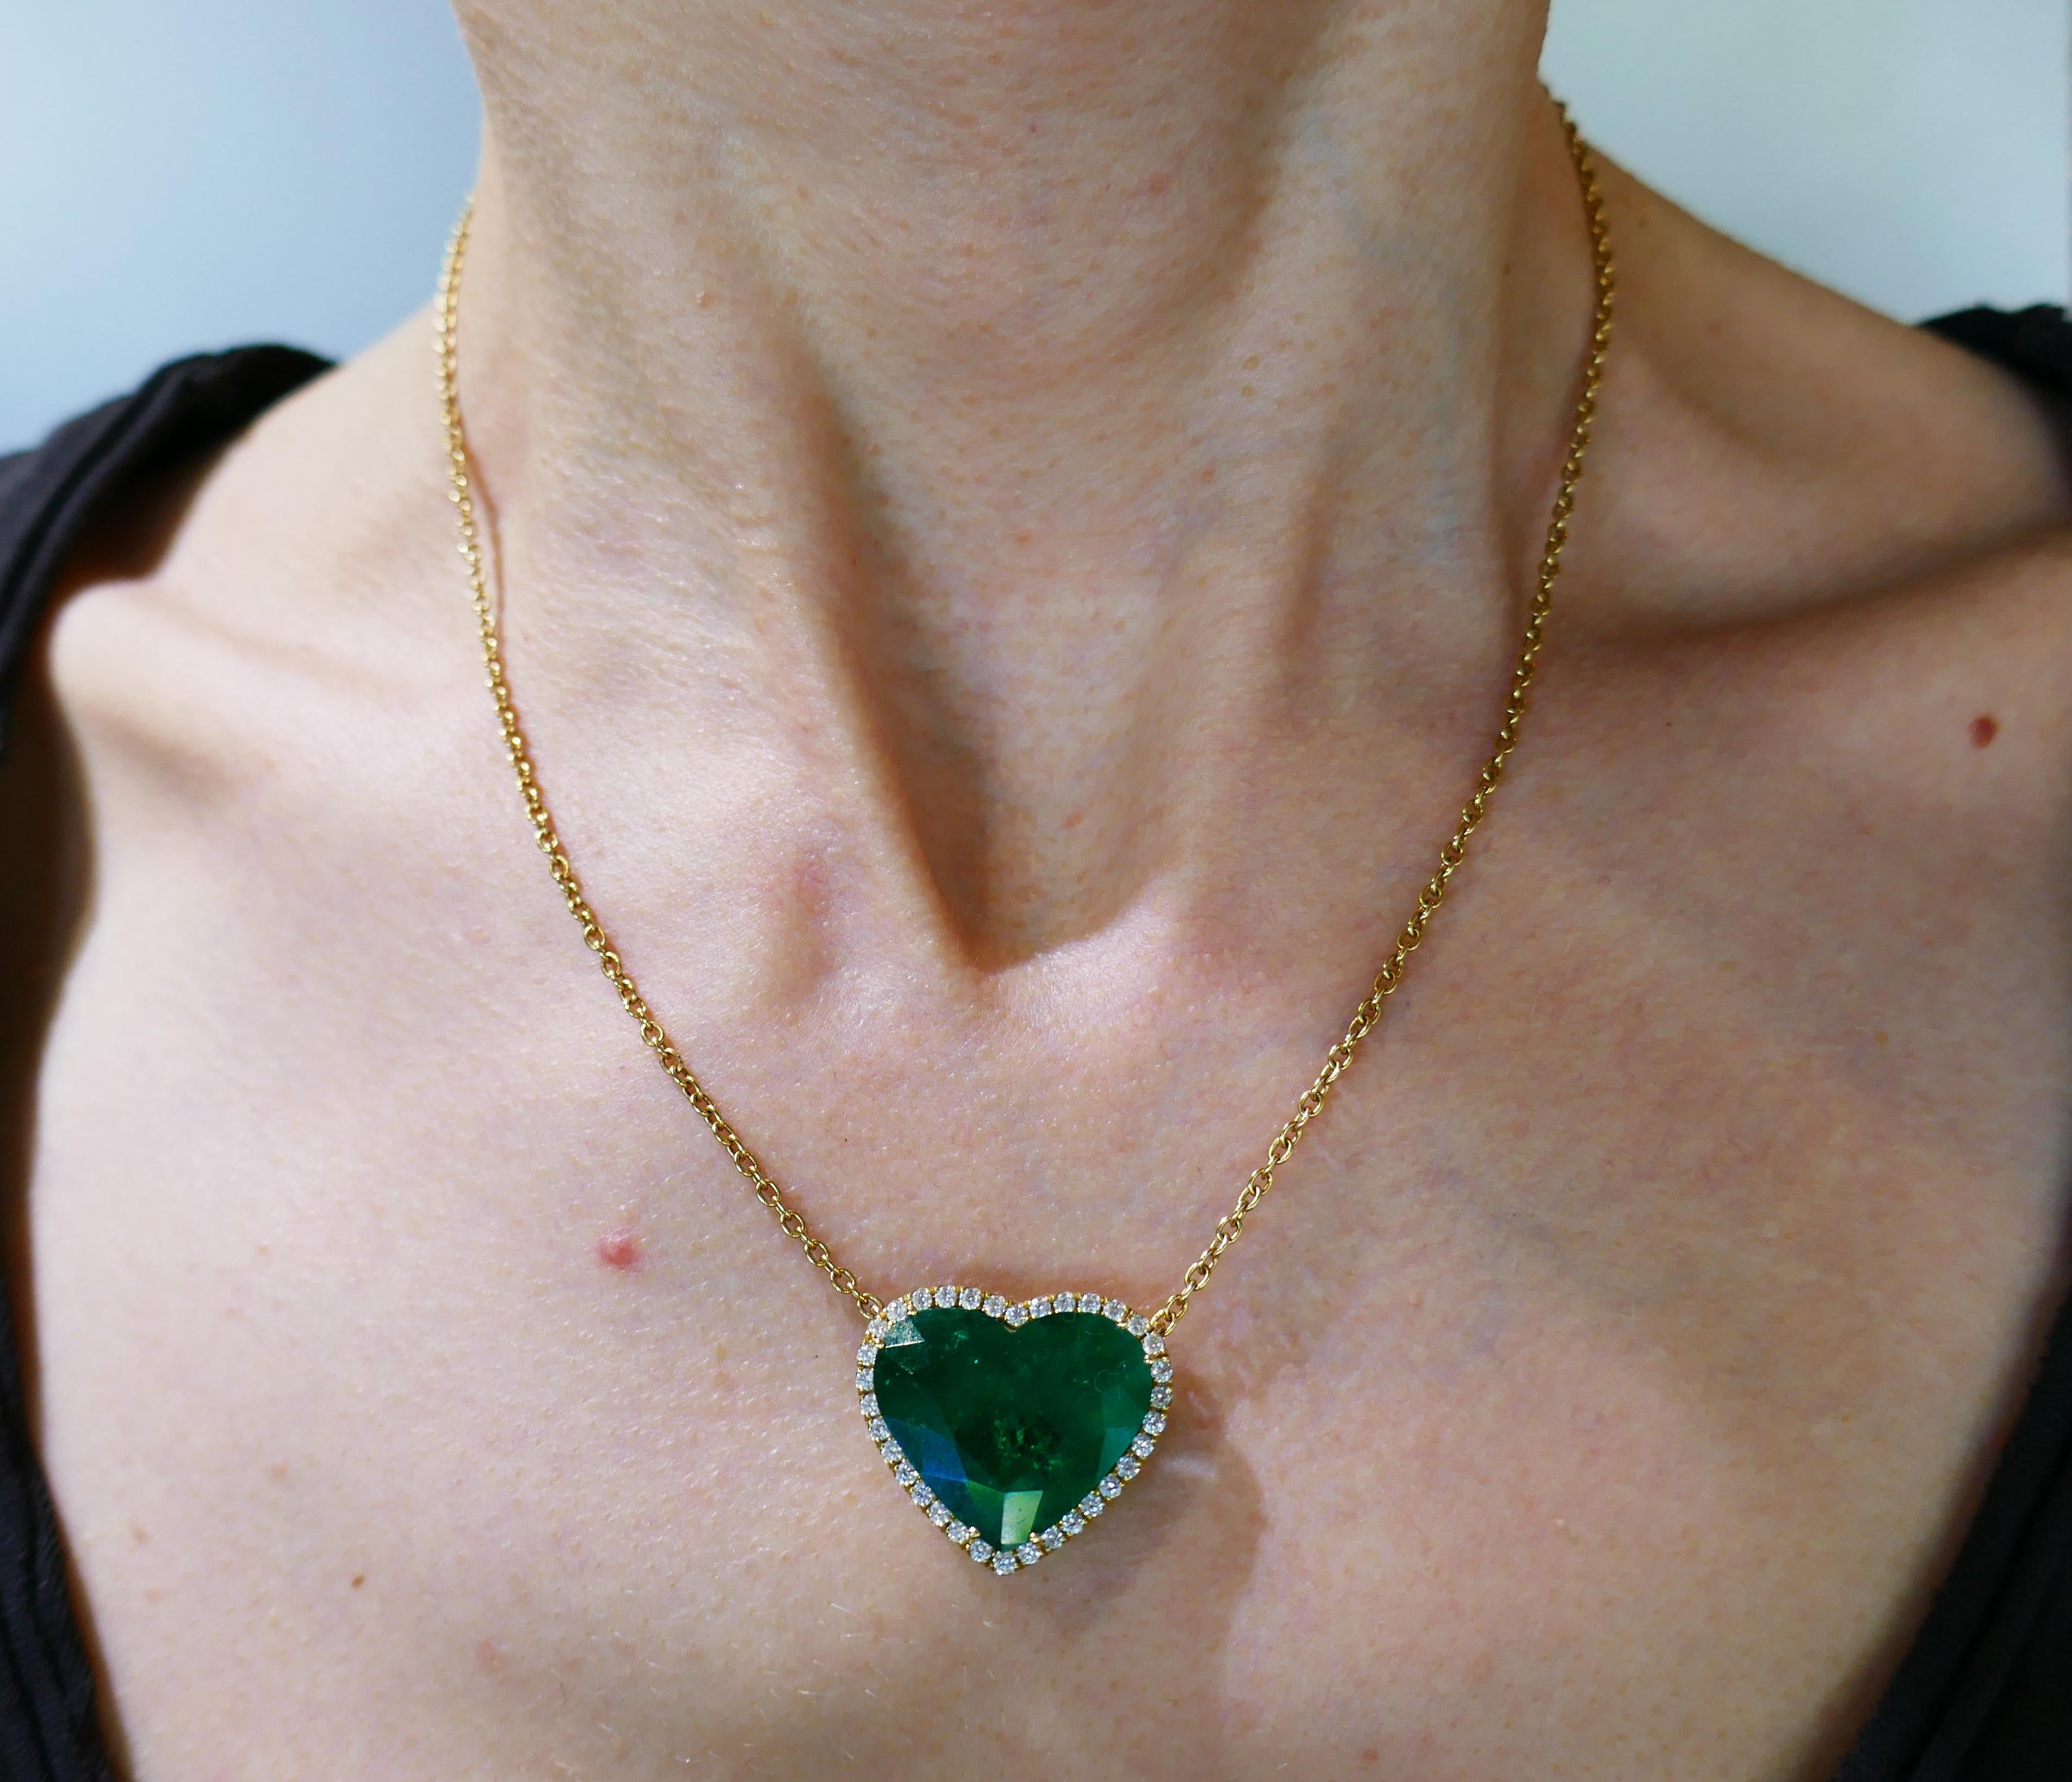 Romantic heart pendant necklace made of 18 karat yellow gold and featuring an approximately 11.40-carat heart-shape Zambian emerald in a diamond halo. The diamonds are round brilliant cut, G-H color, VS clarity, total weight approximately 0.34